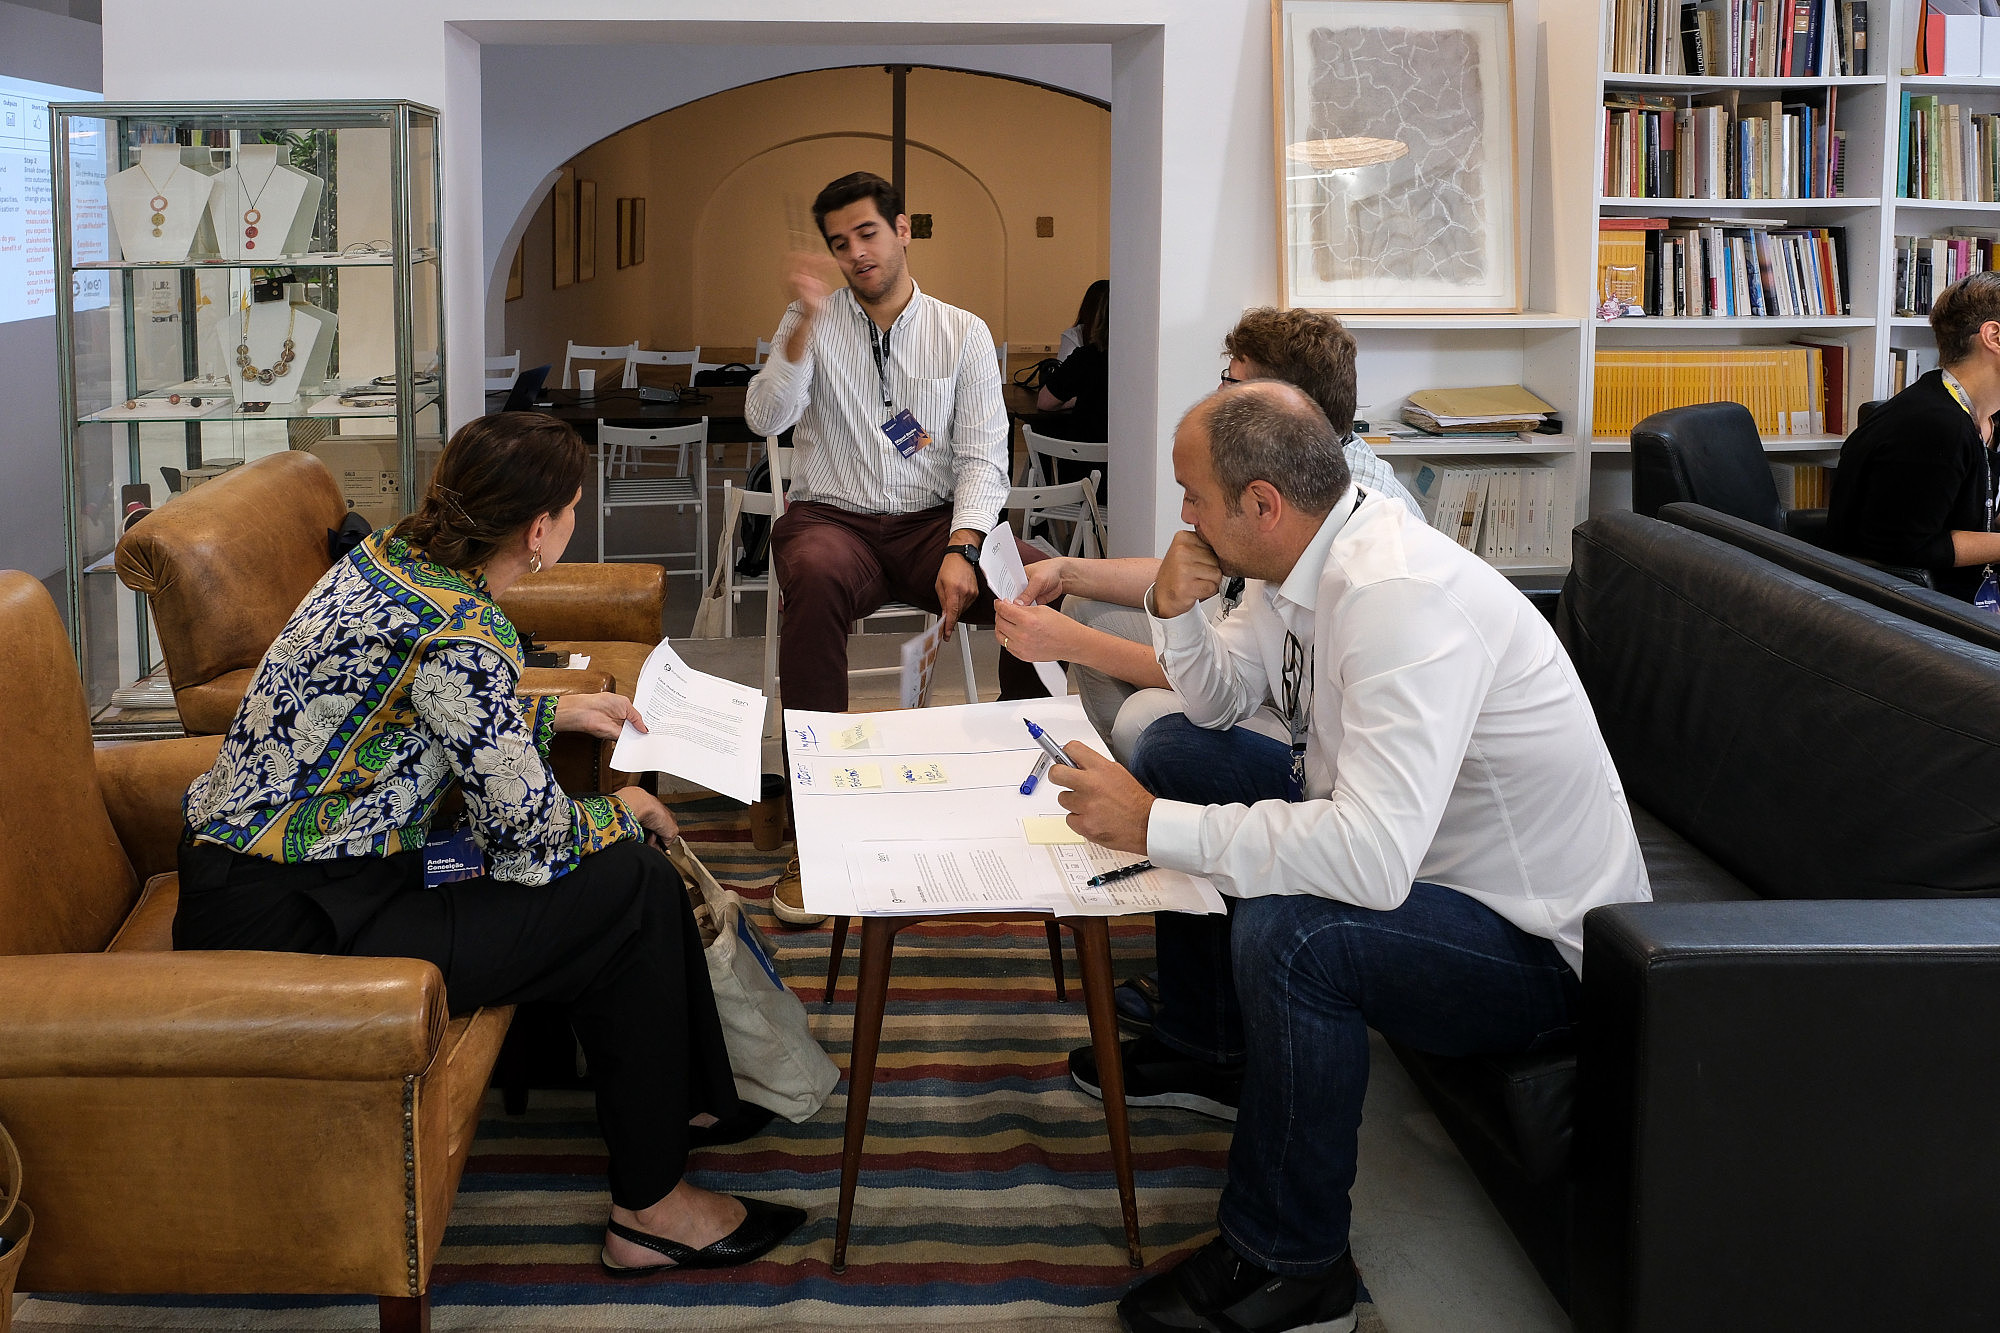 Four people are sitting around a small table. On the table is a large piece of paper with notes. One person is talking an gesturing with their arms, while two of the others are looking at them.  © Image: Jorge Gomes